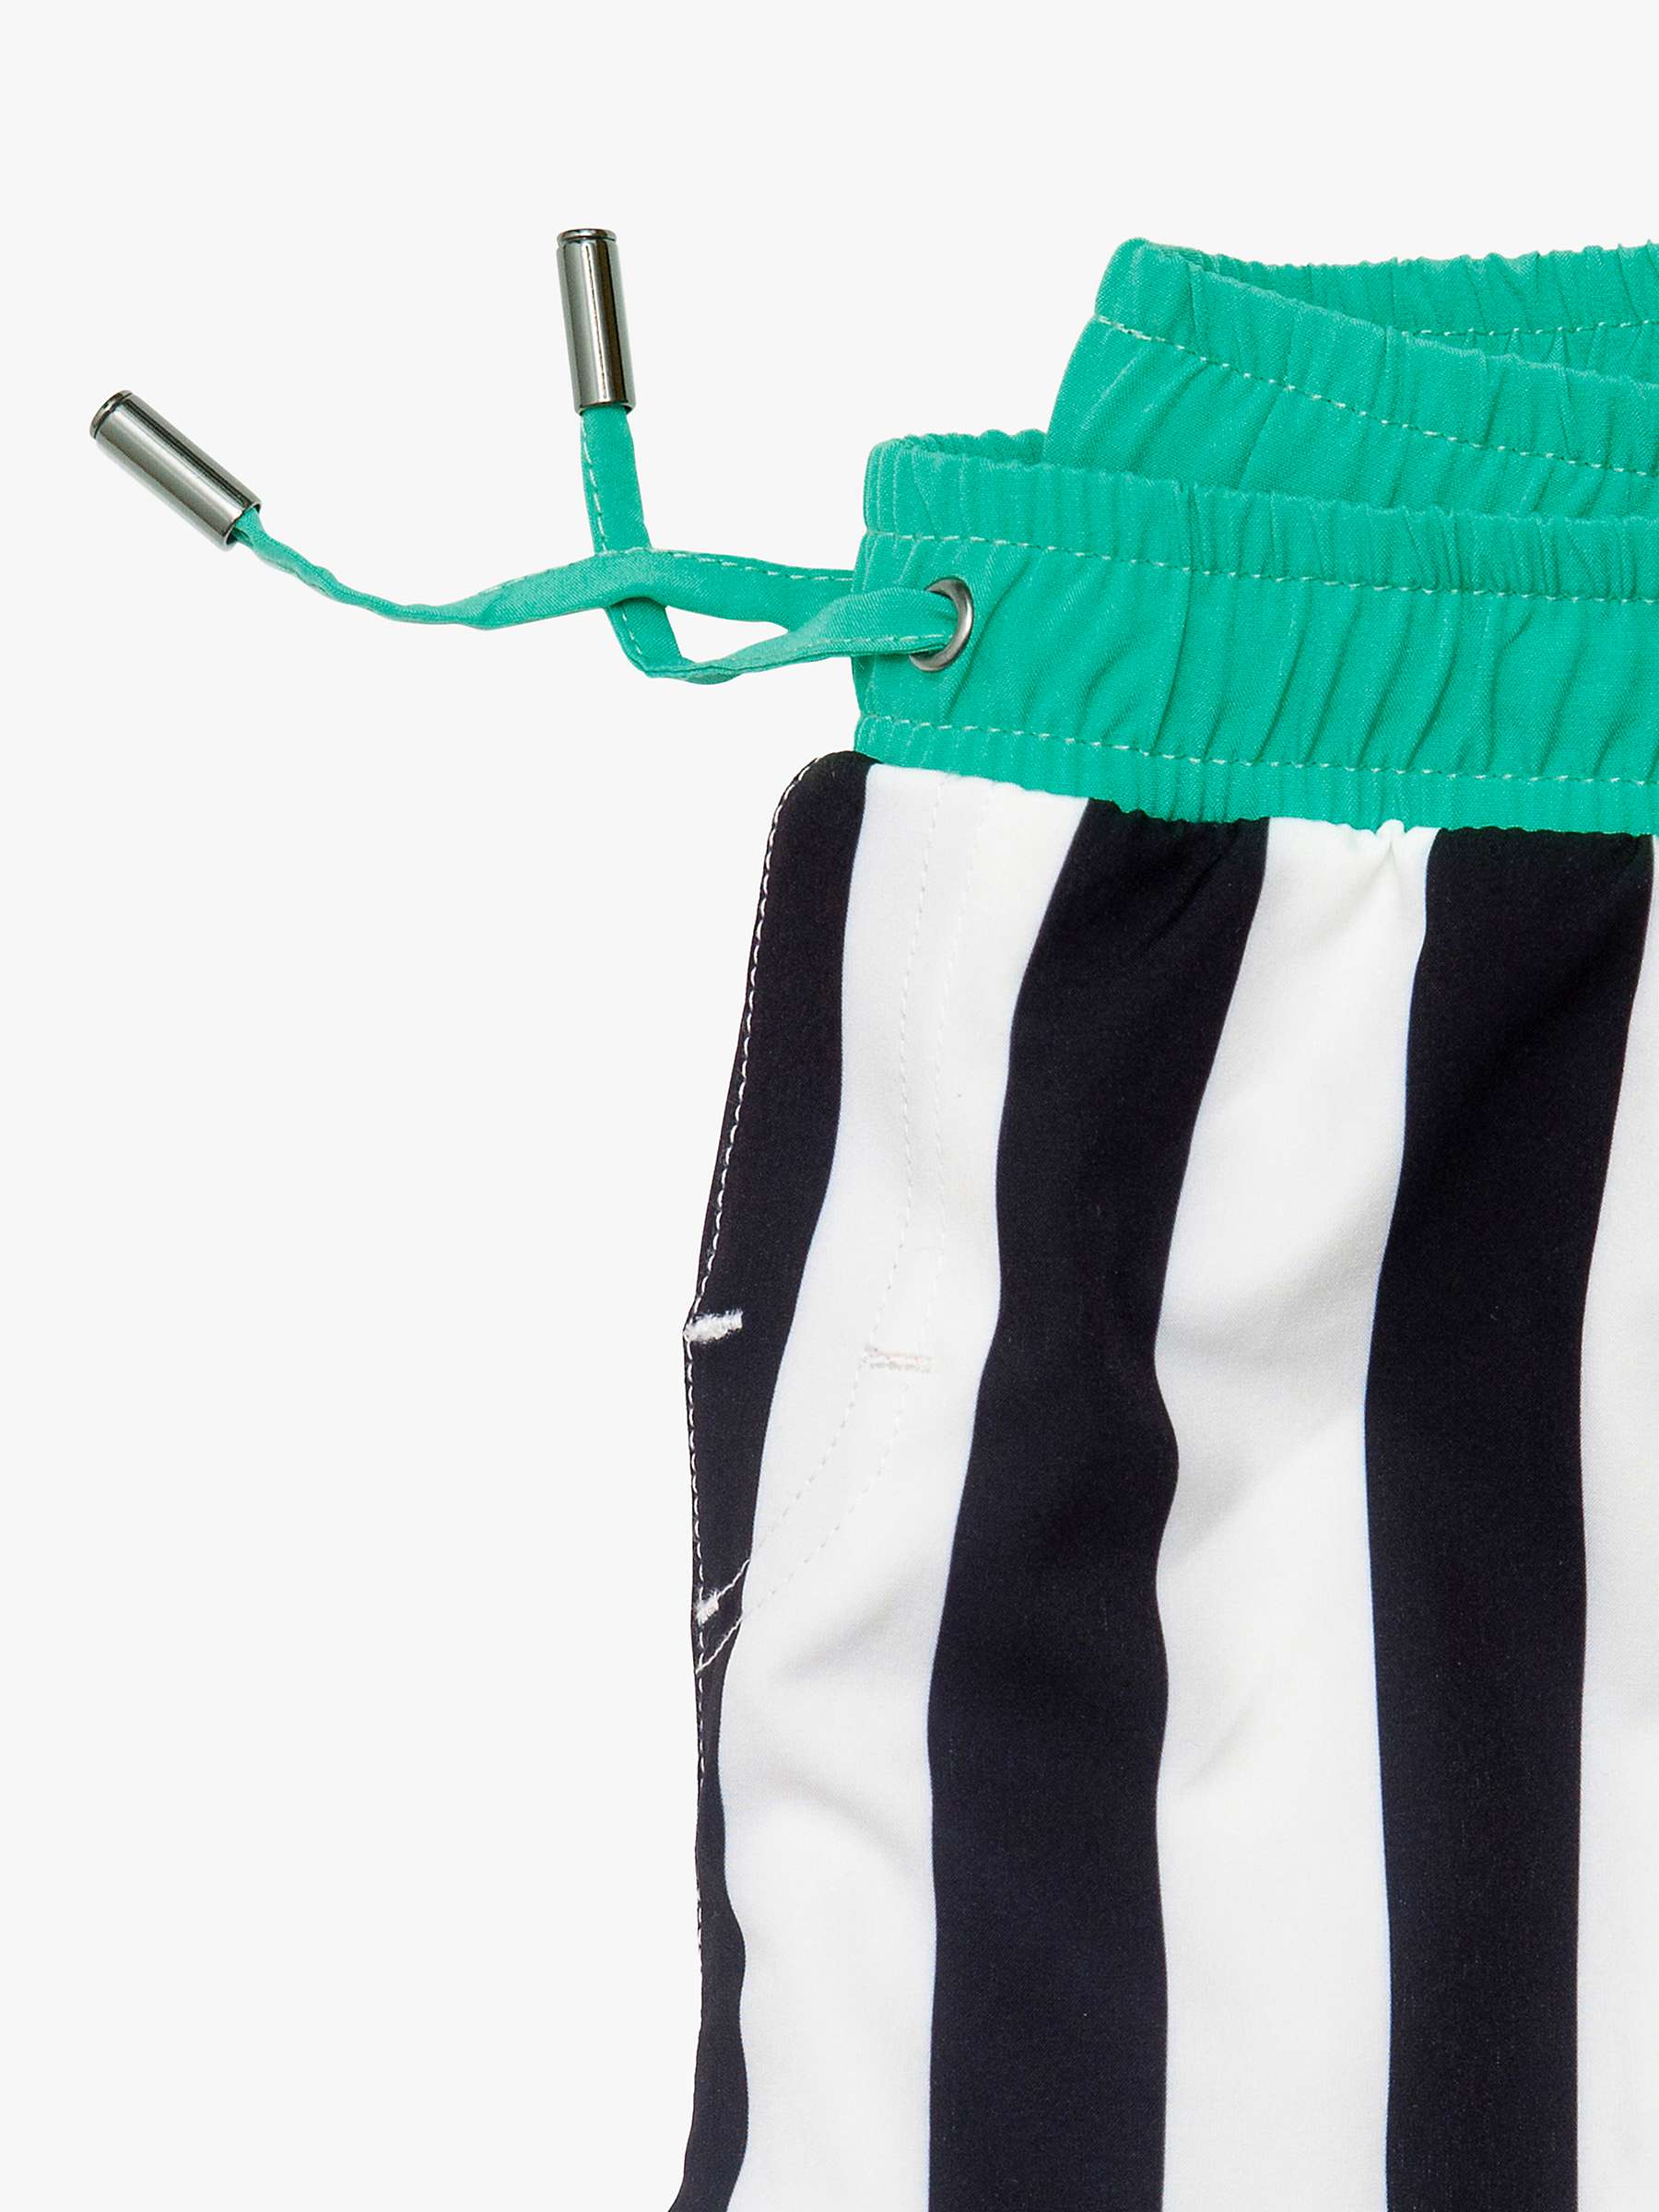 Buy Roarsome Patch Striped Swim Trunks, Black/White Online at johnlewis.com